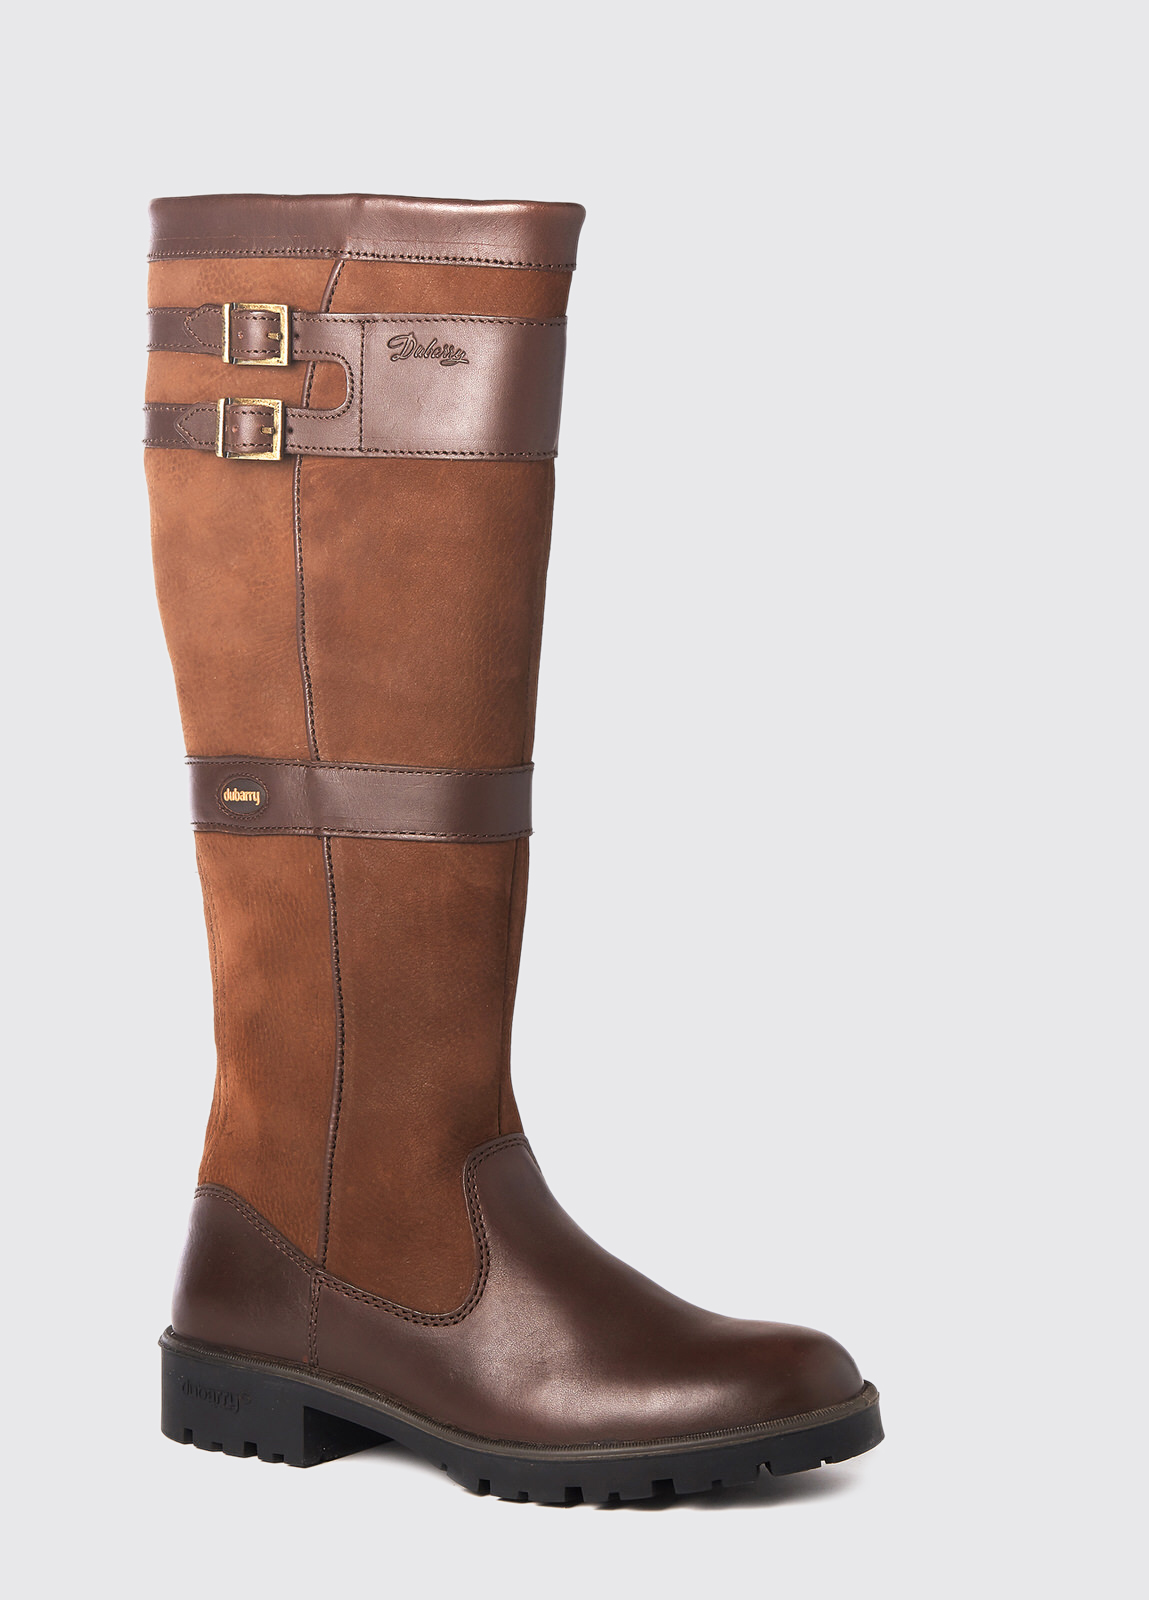 Country Boot | Dubarry of Ireland -